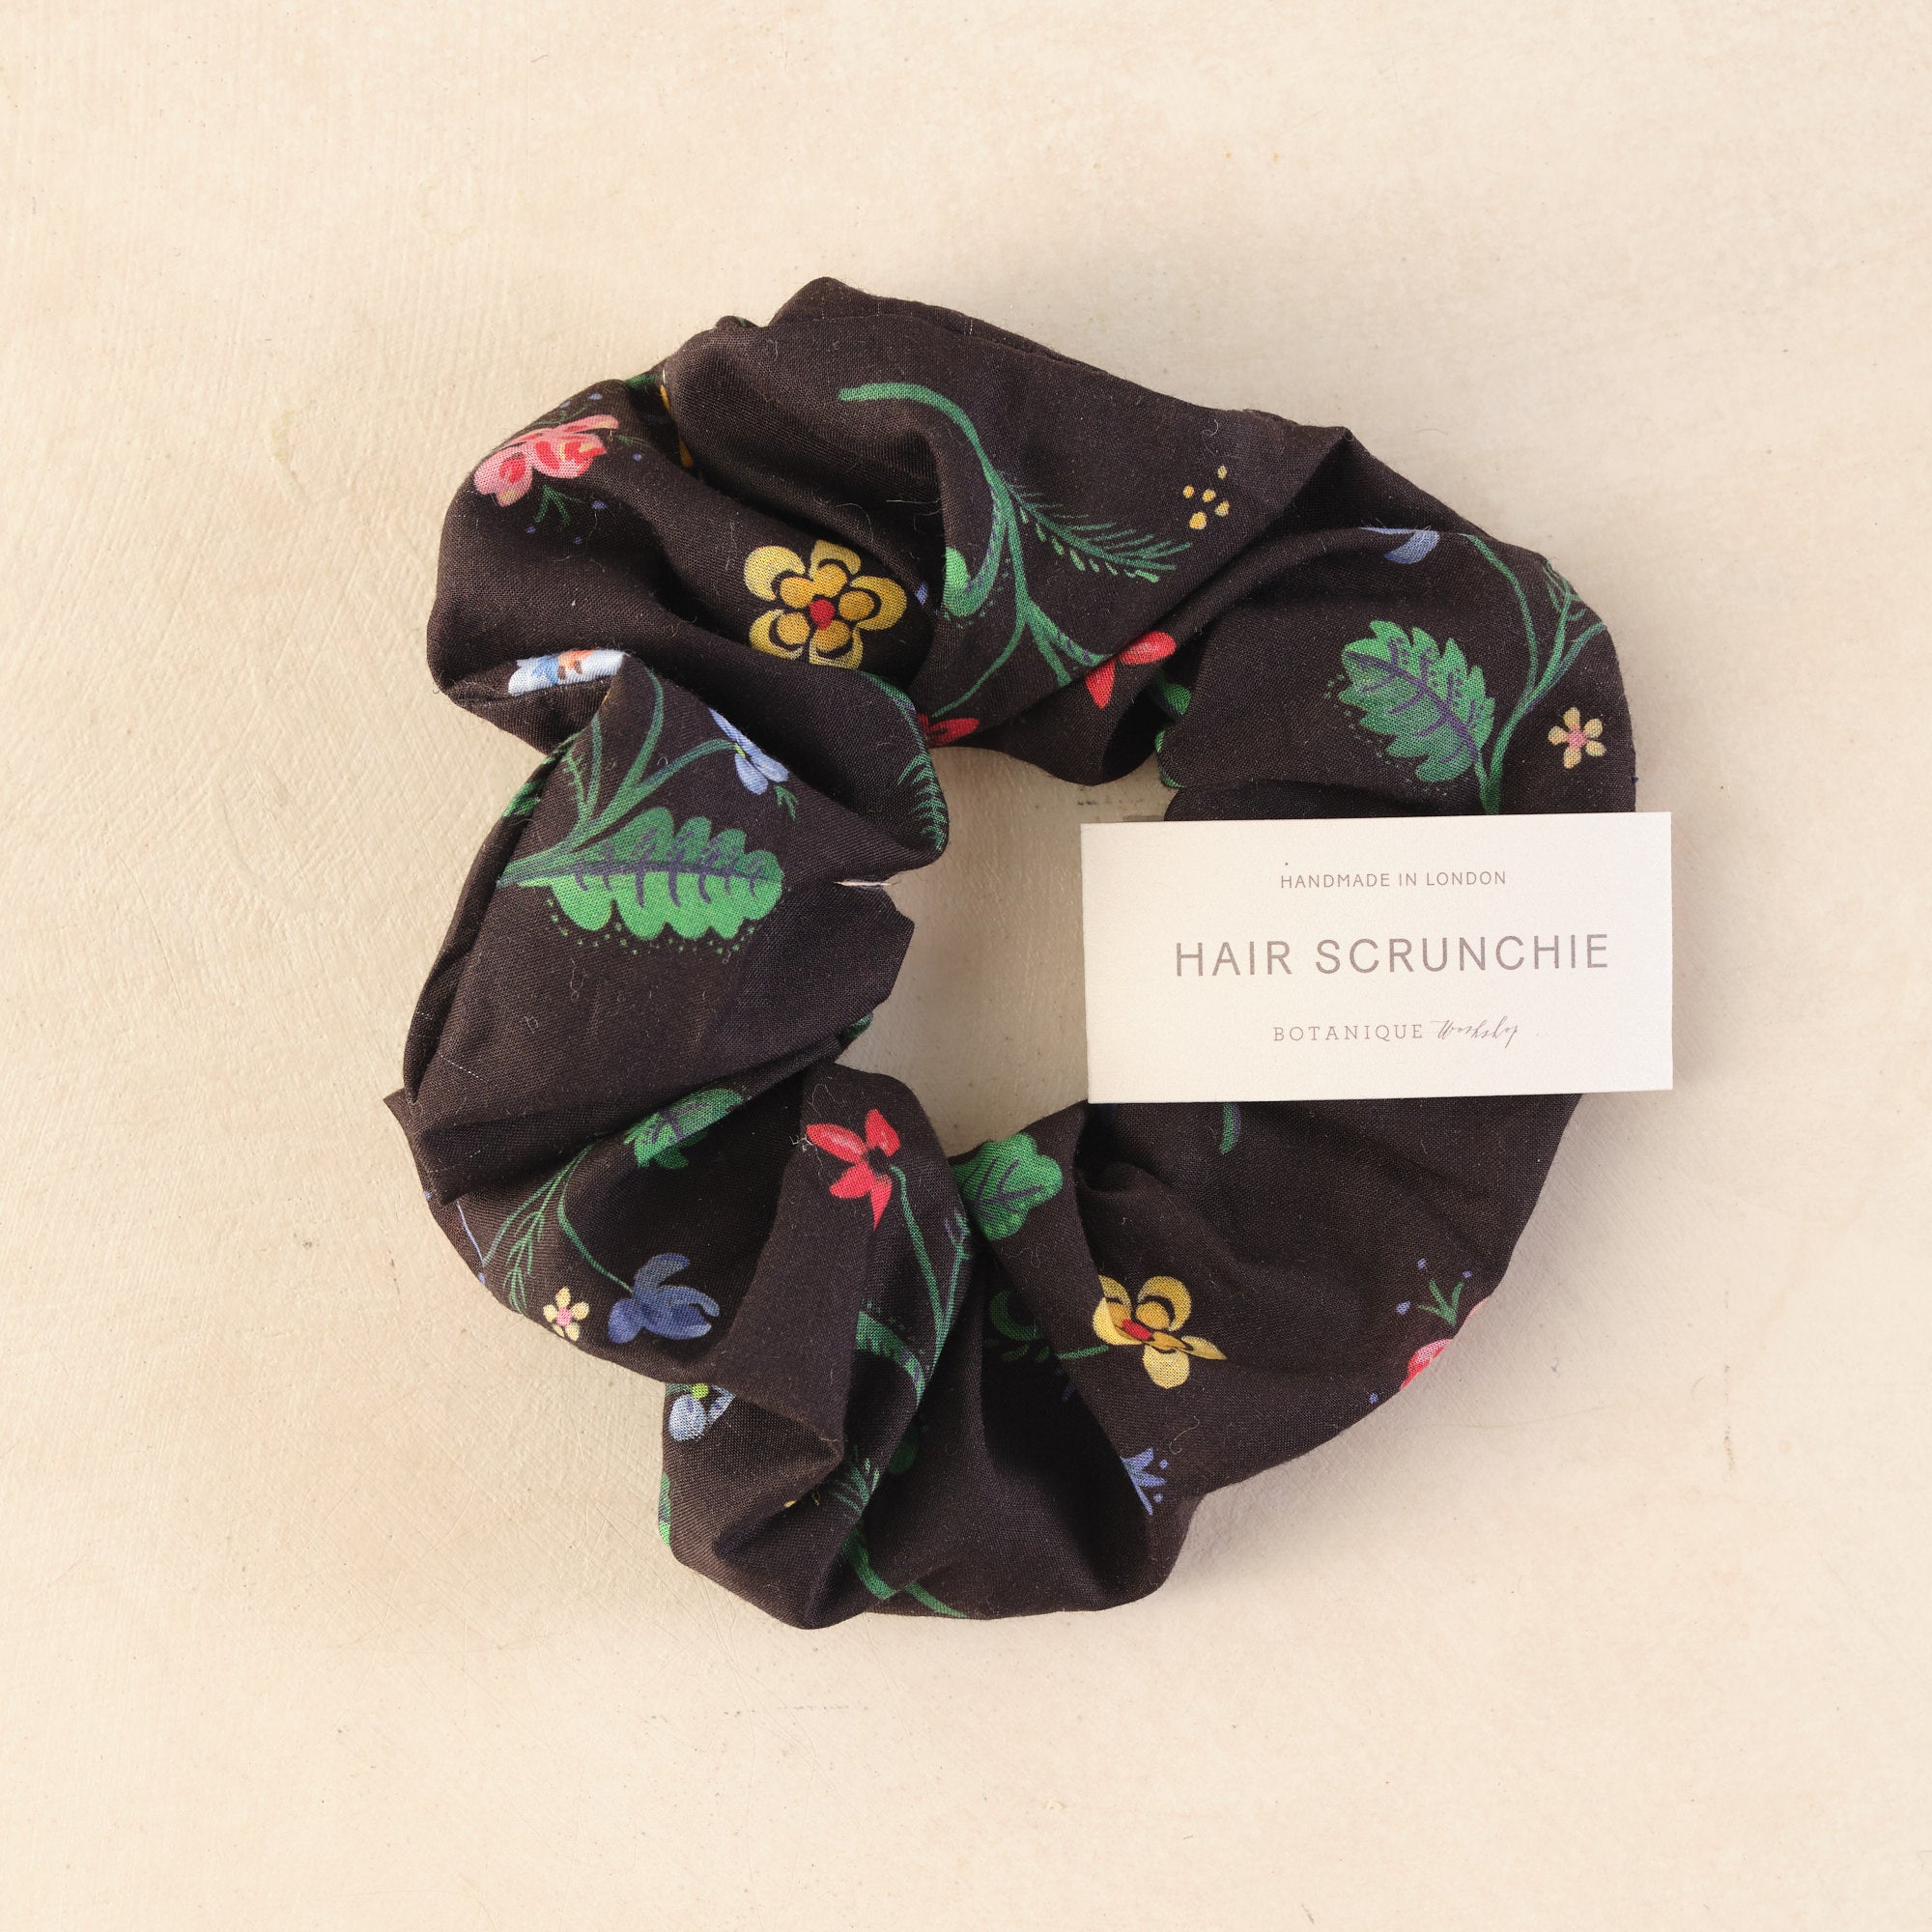 Hair Scrunchies Frequently Asked Questions